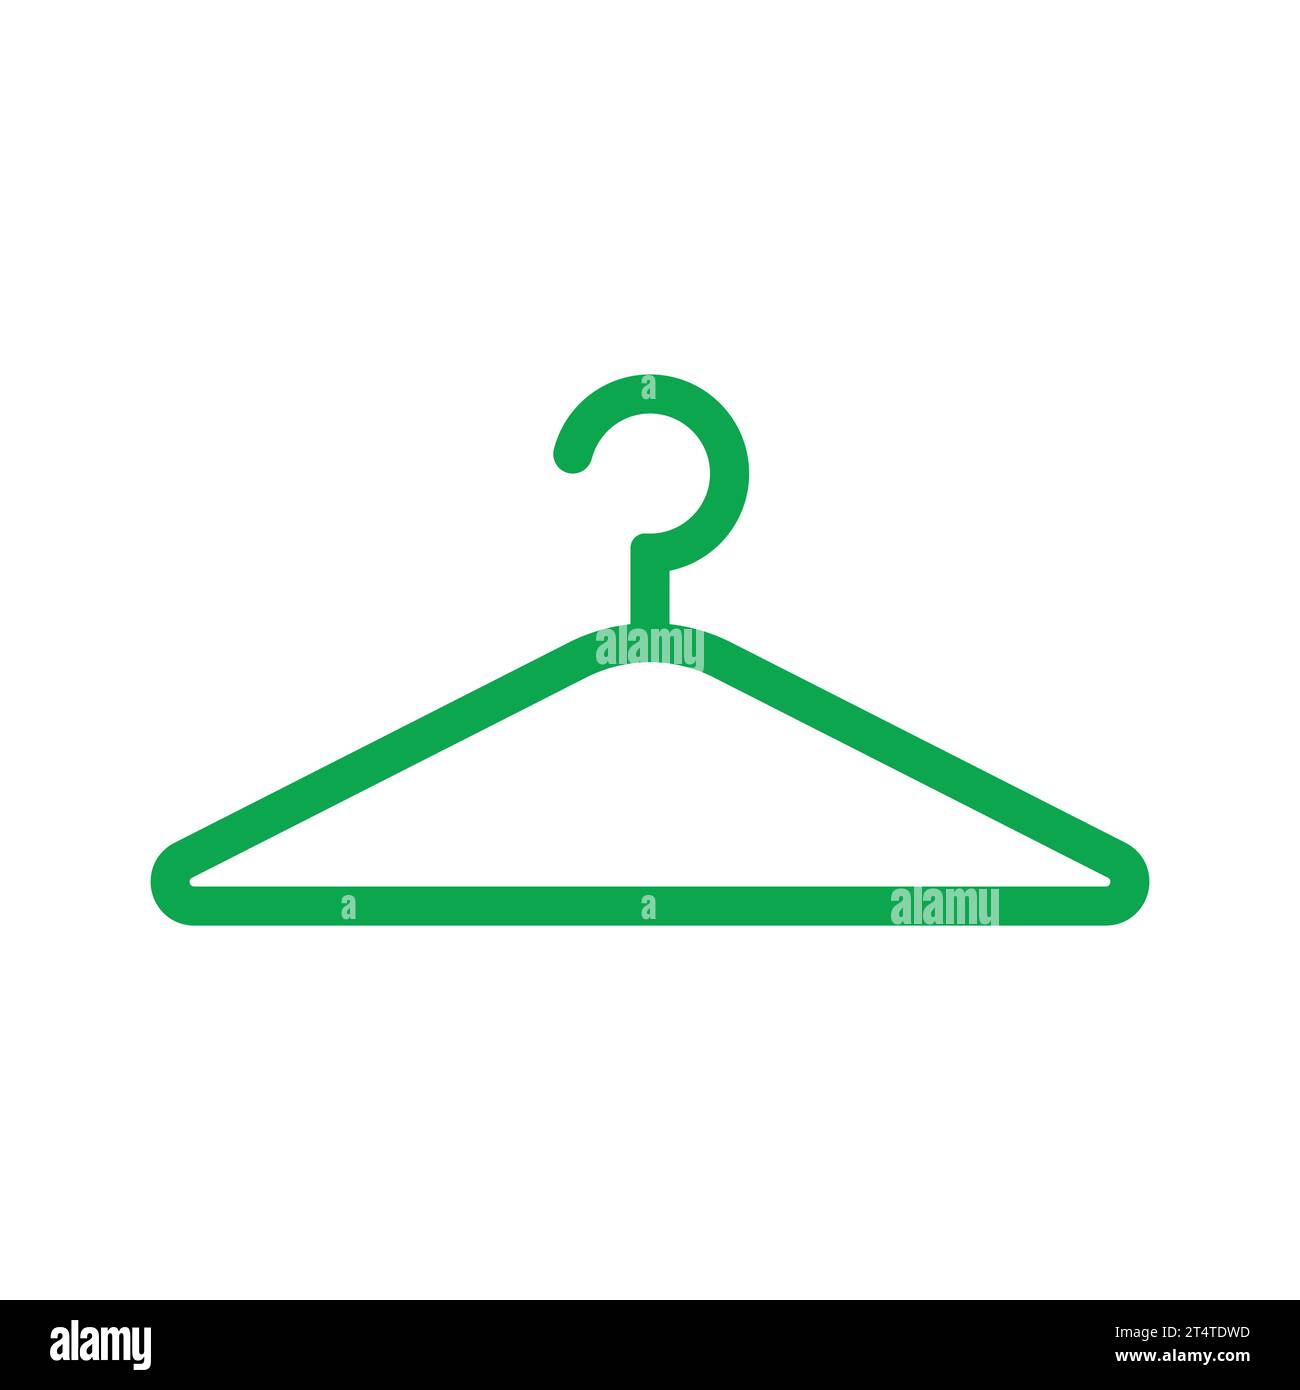 Clothes Line Isolated Cliparts, Stock Vector and Royalty Free Clothes Line  Isolated Illustrations